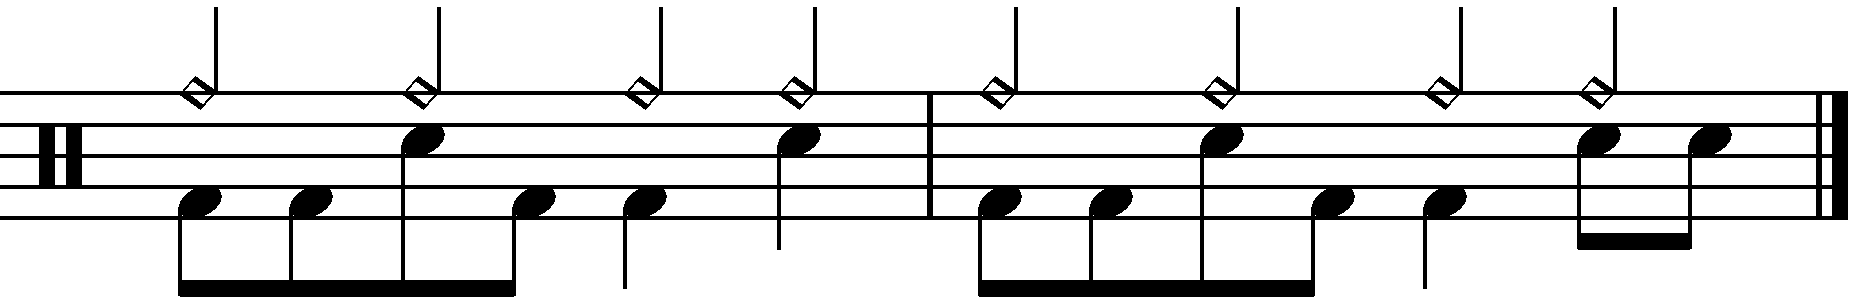 2 Bar Grooves - Example 3d